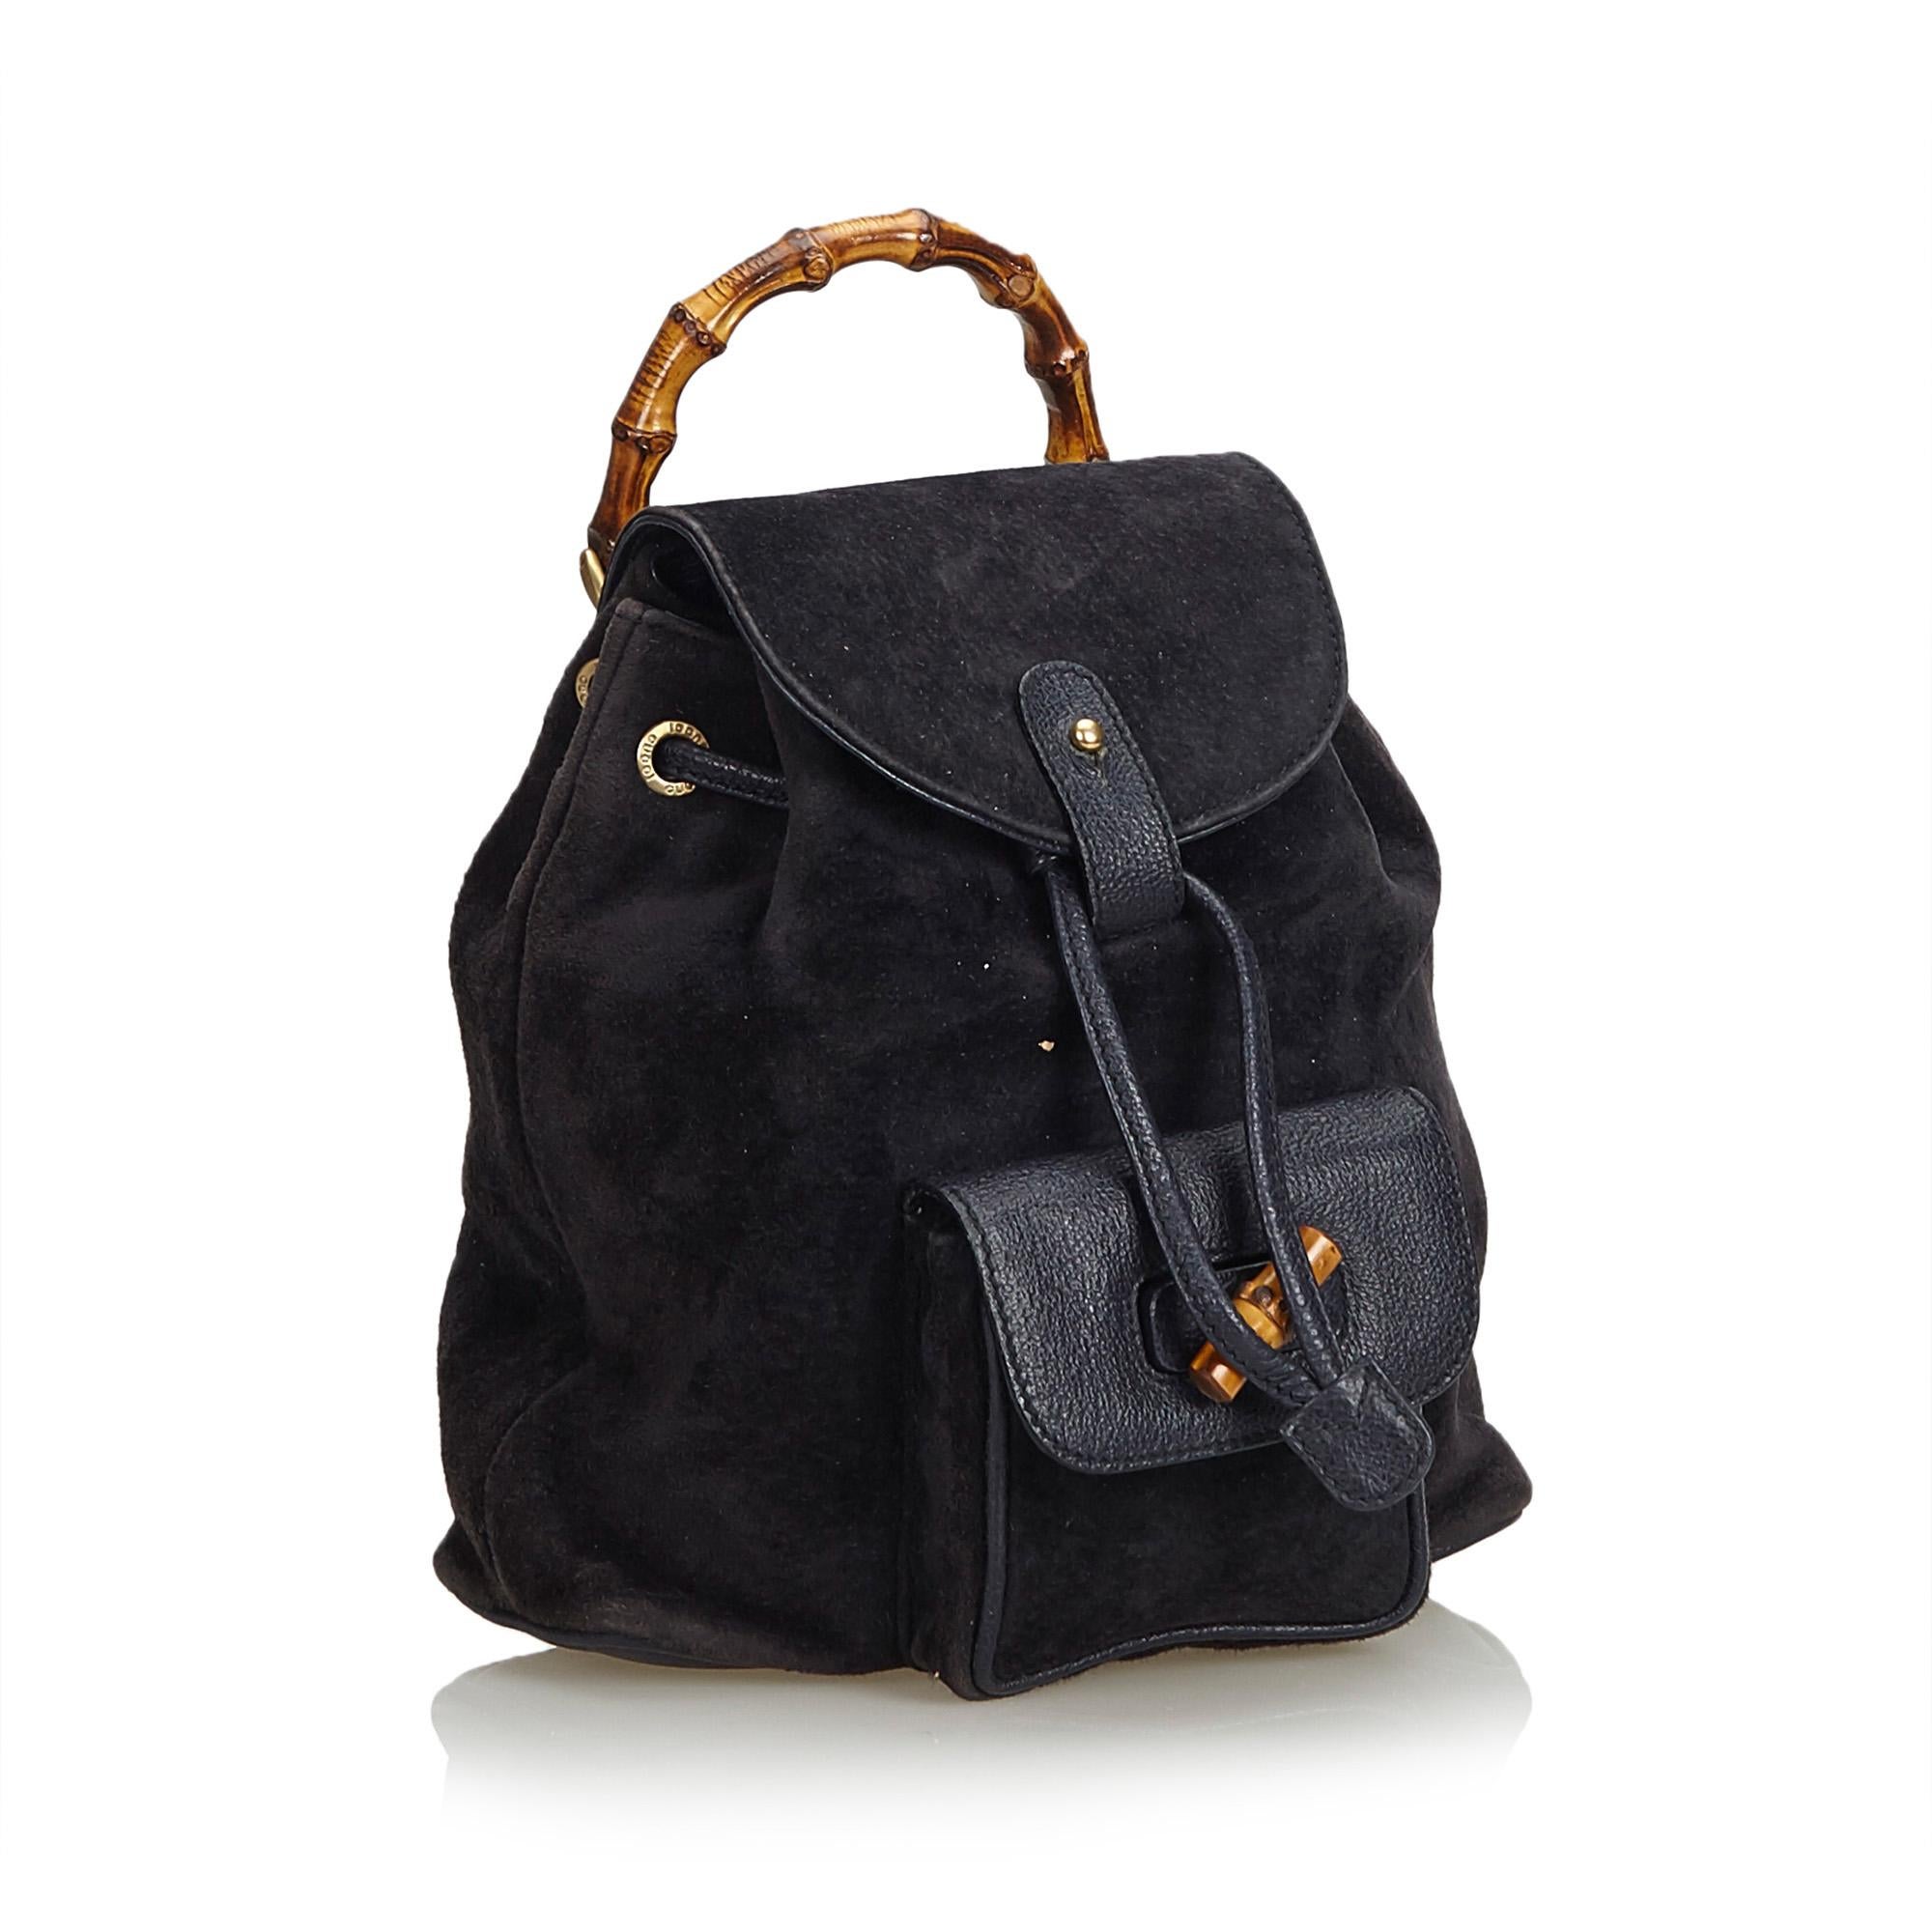 This backpack features a suede body, flat leather back straps, bamboo top handle, top flap with button closure, drawstring closure, exterior flap pocket with bamboo twist lock closure, and interior zip pocket. It carries as B condition